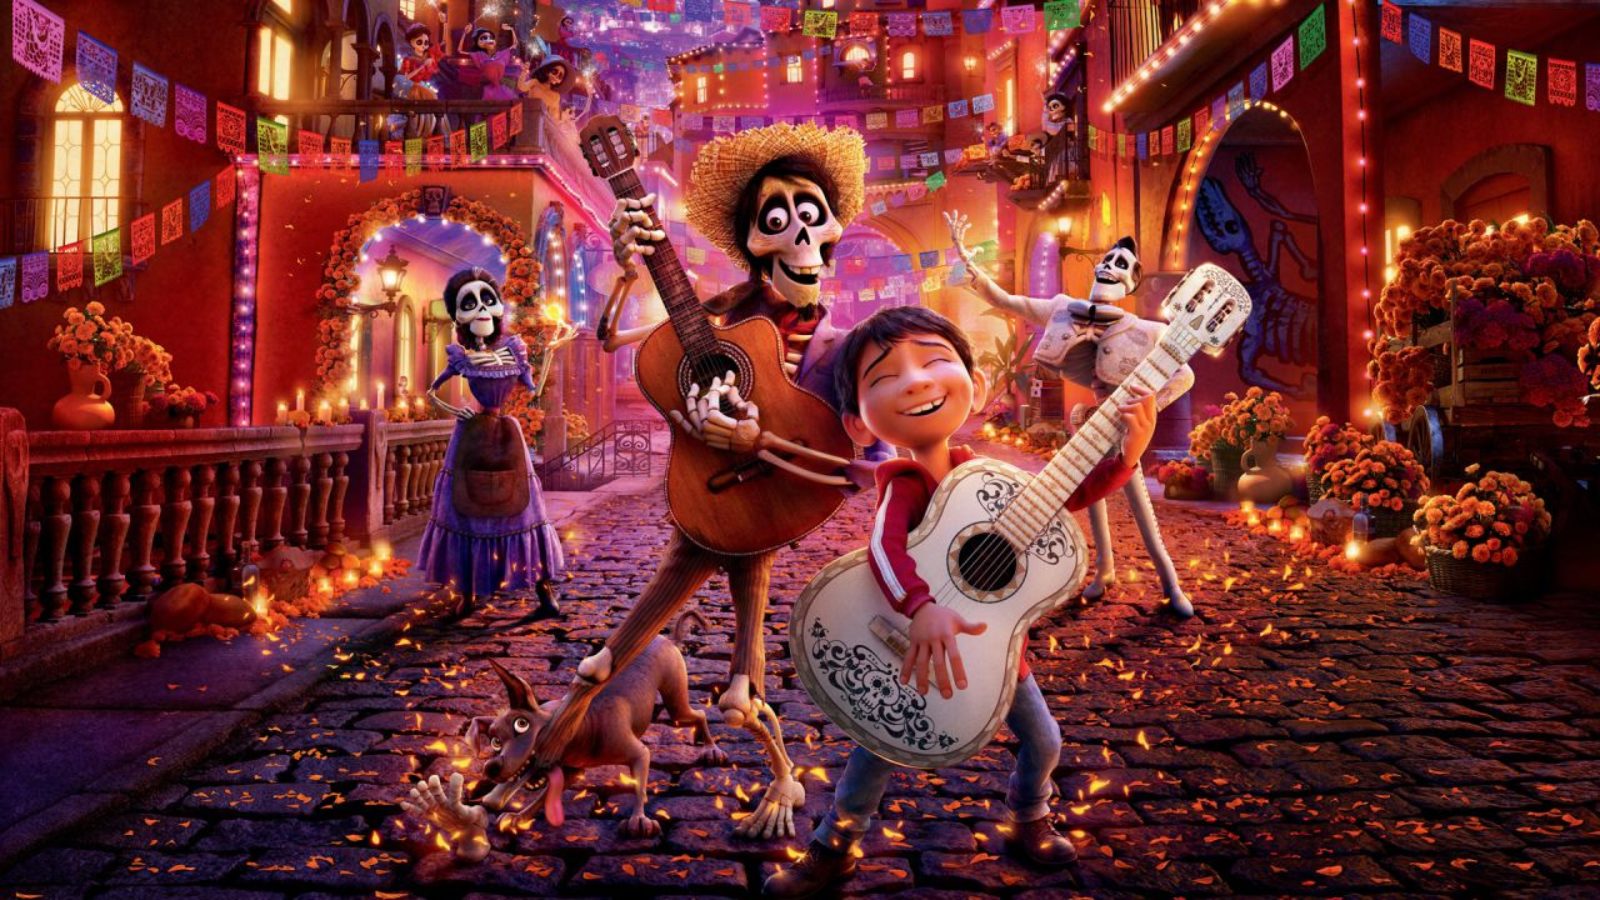 Coco Soundtrack: Every Song in the 2017 Disney-Pixar Movie